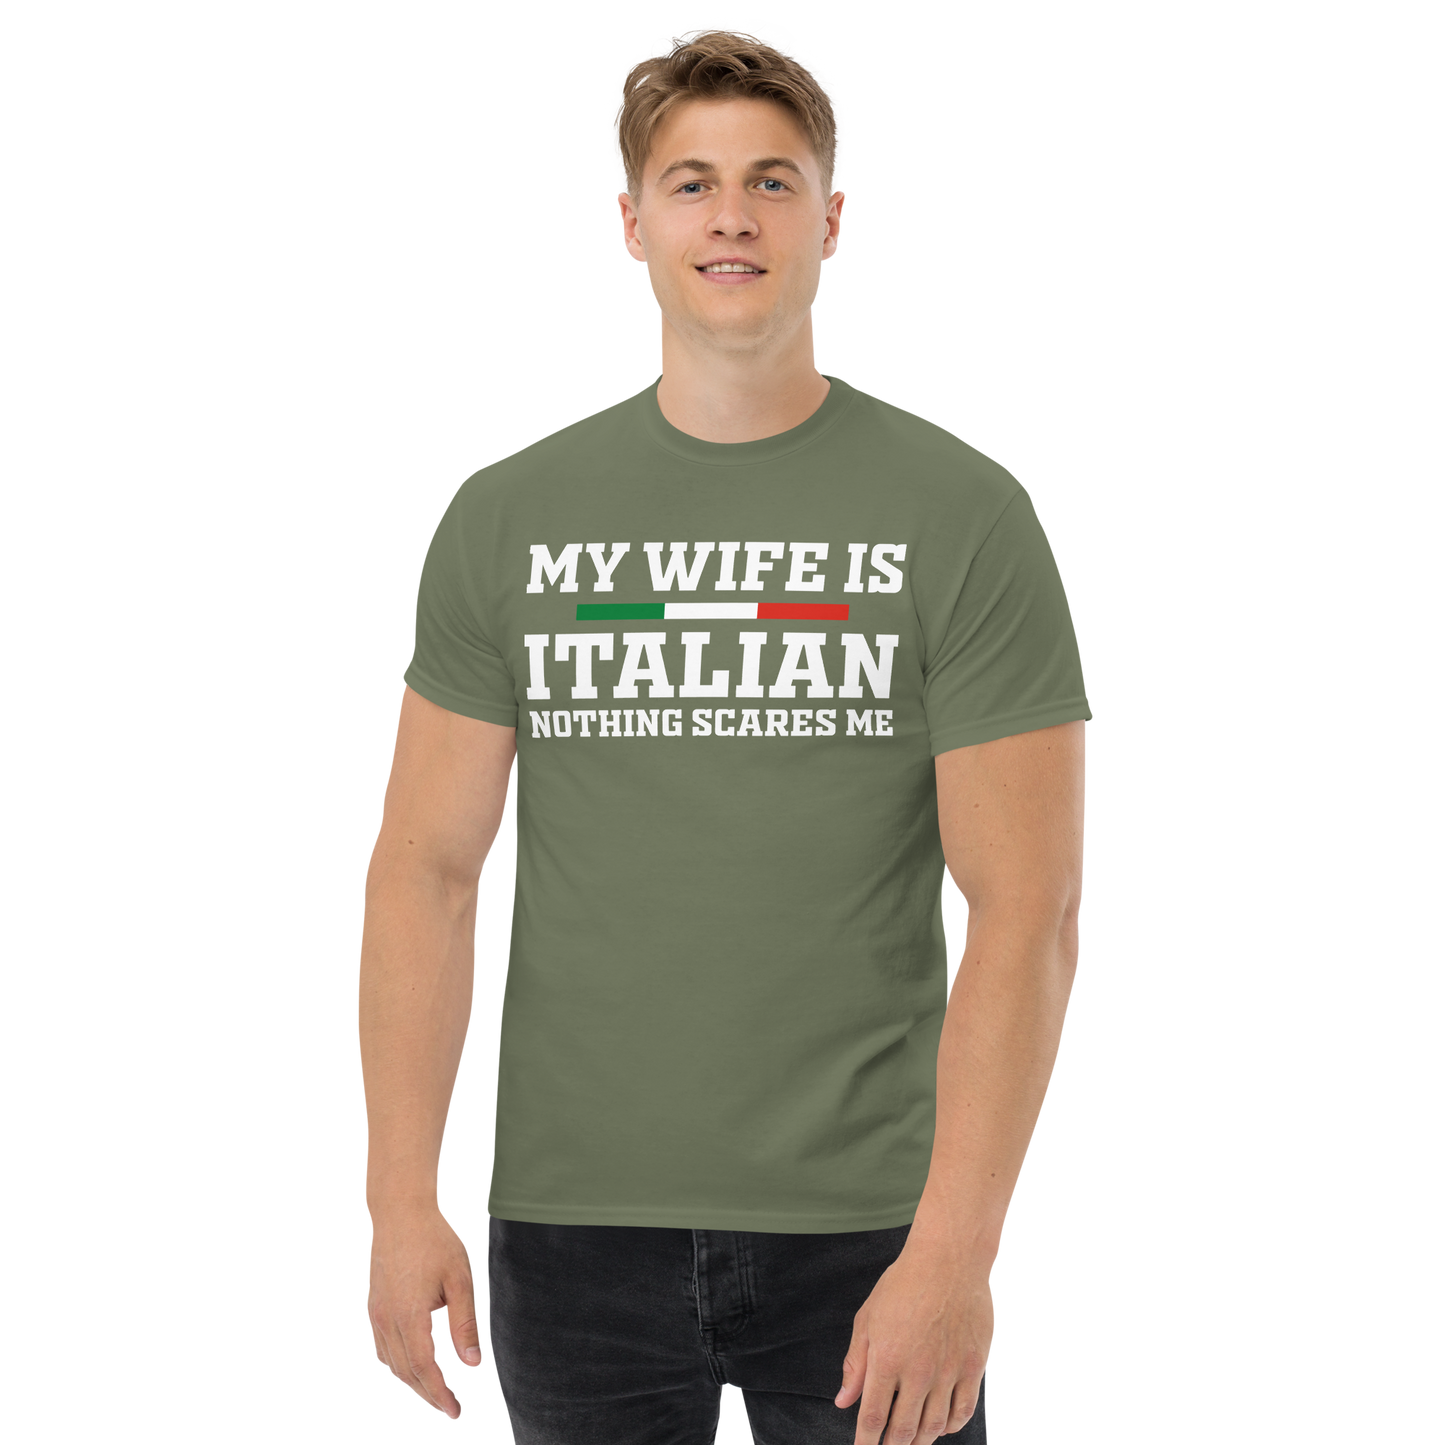 My Wife is Italian: Nothing Scares Me Humor T-Shirt- Vintage Tee for Italians